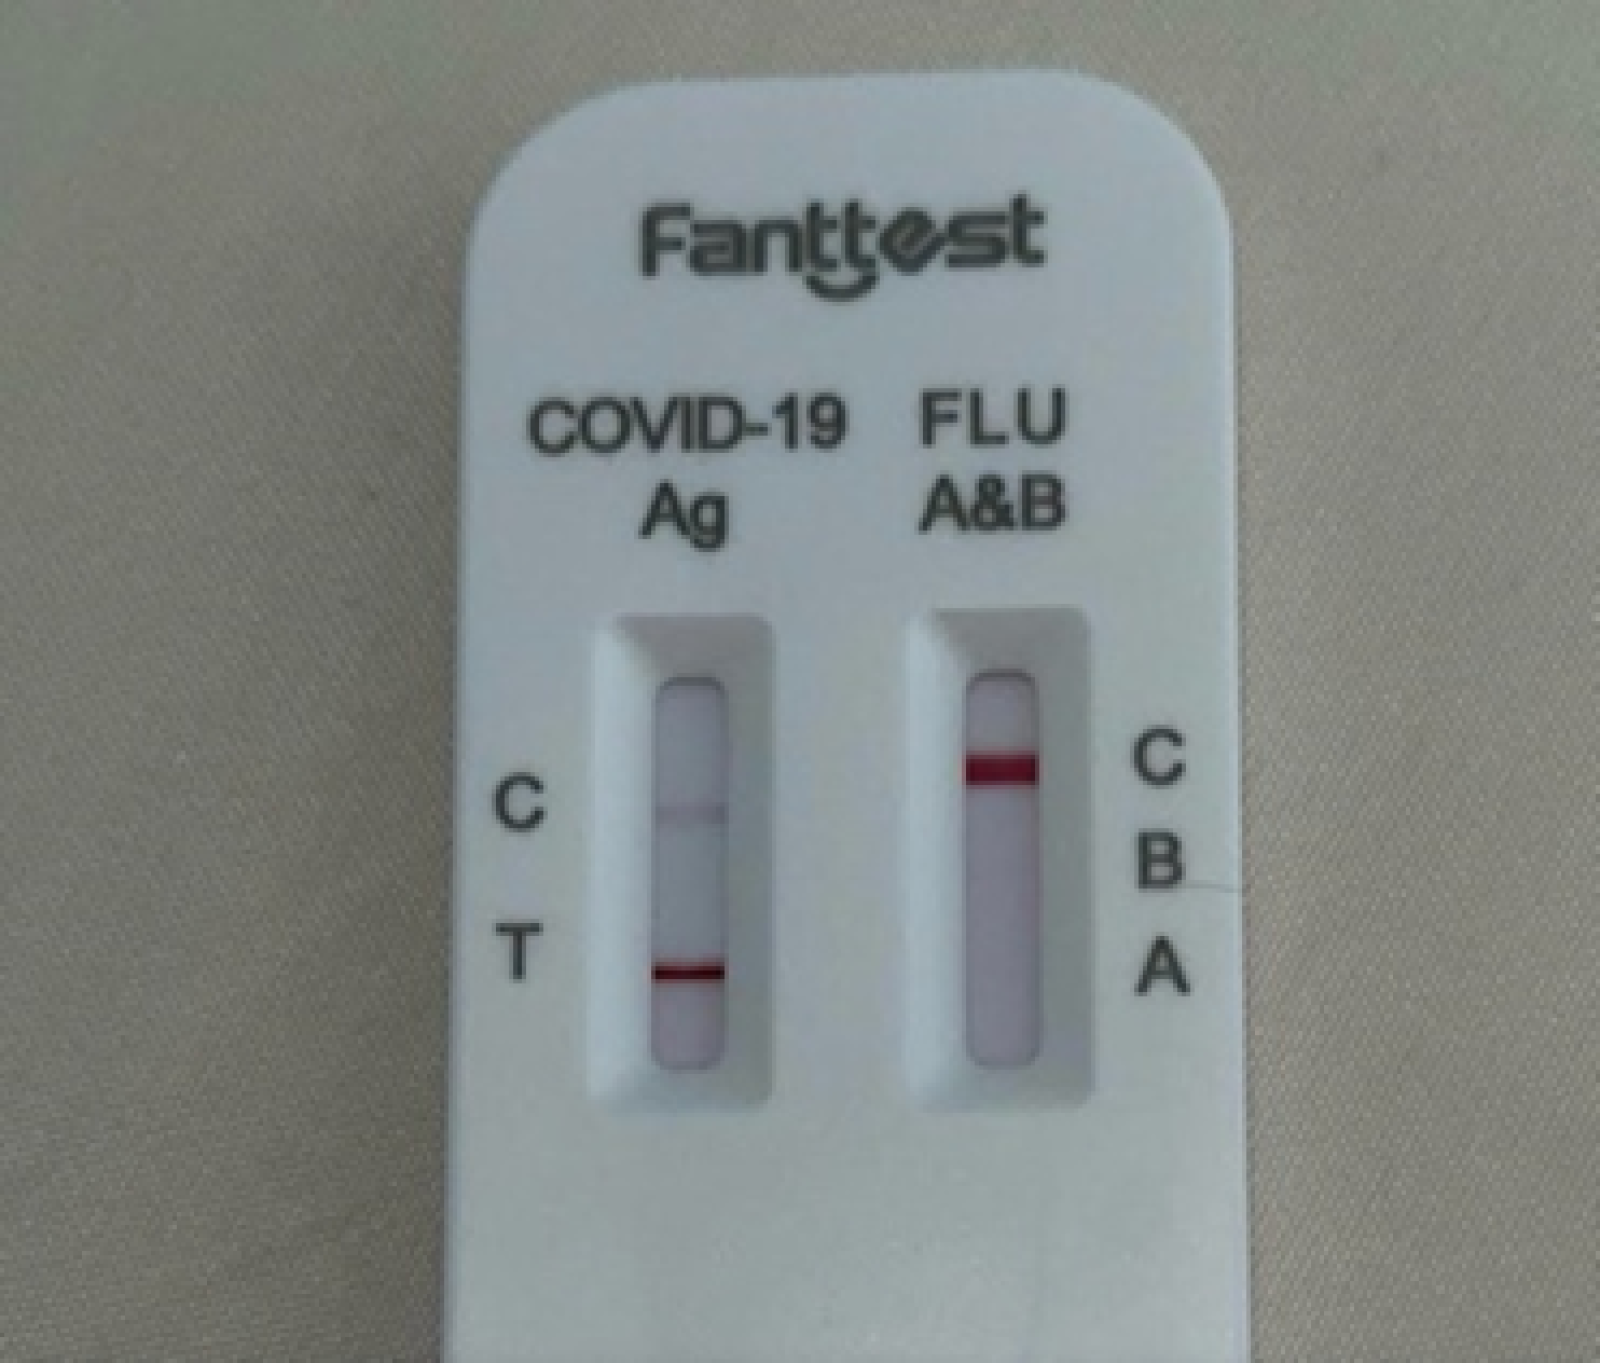 Warning over ‘faint’ COVID-19 test kit results